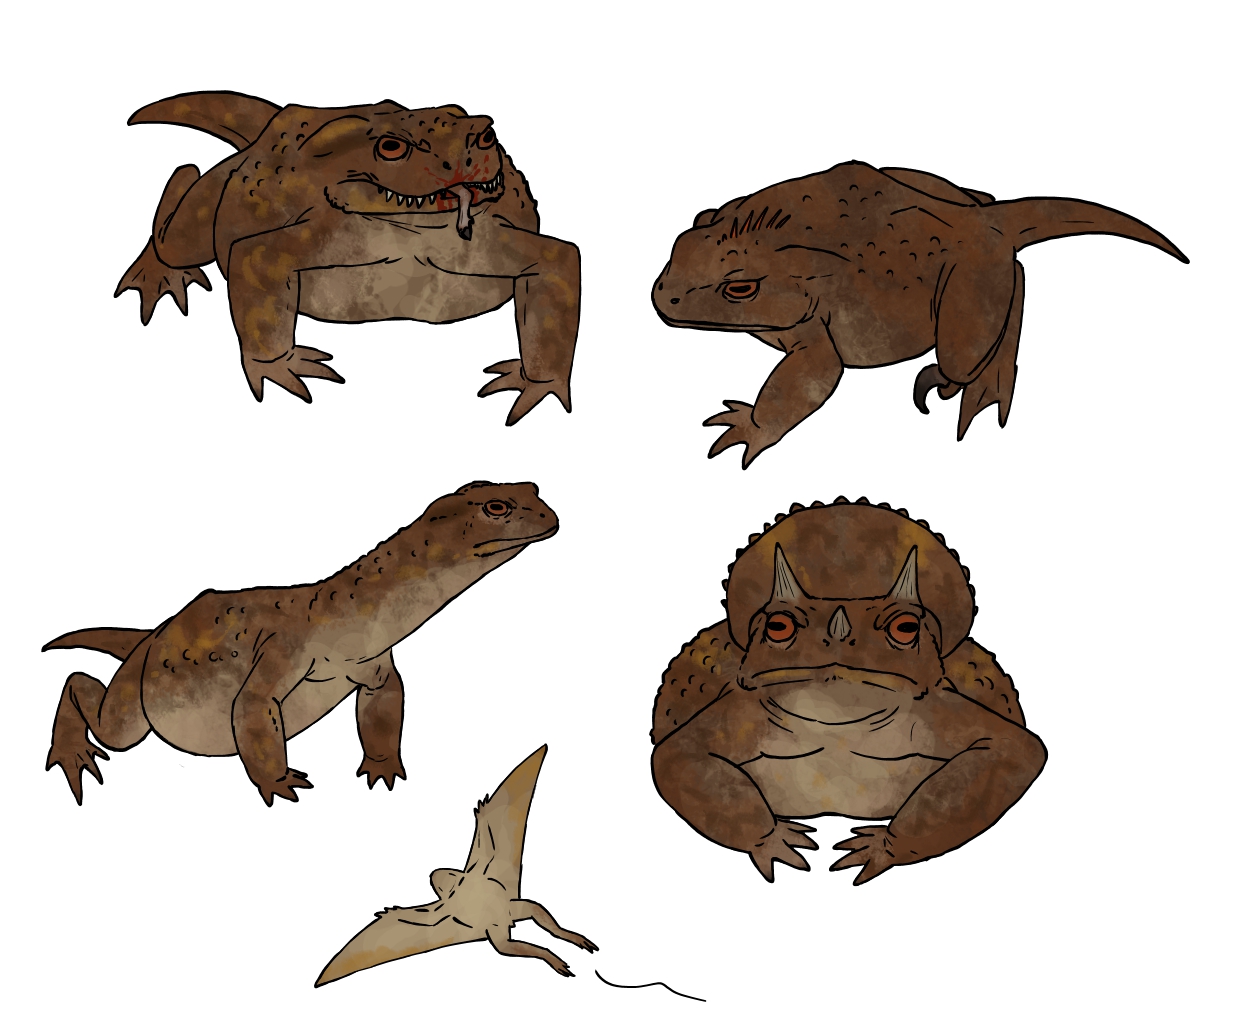 Scientifically accurate Jurassic Park dinosaurs by Ramul on DeviantArt